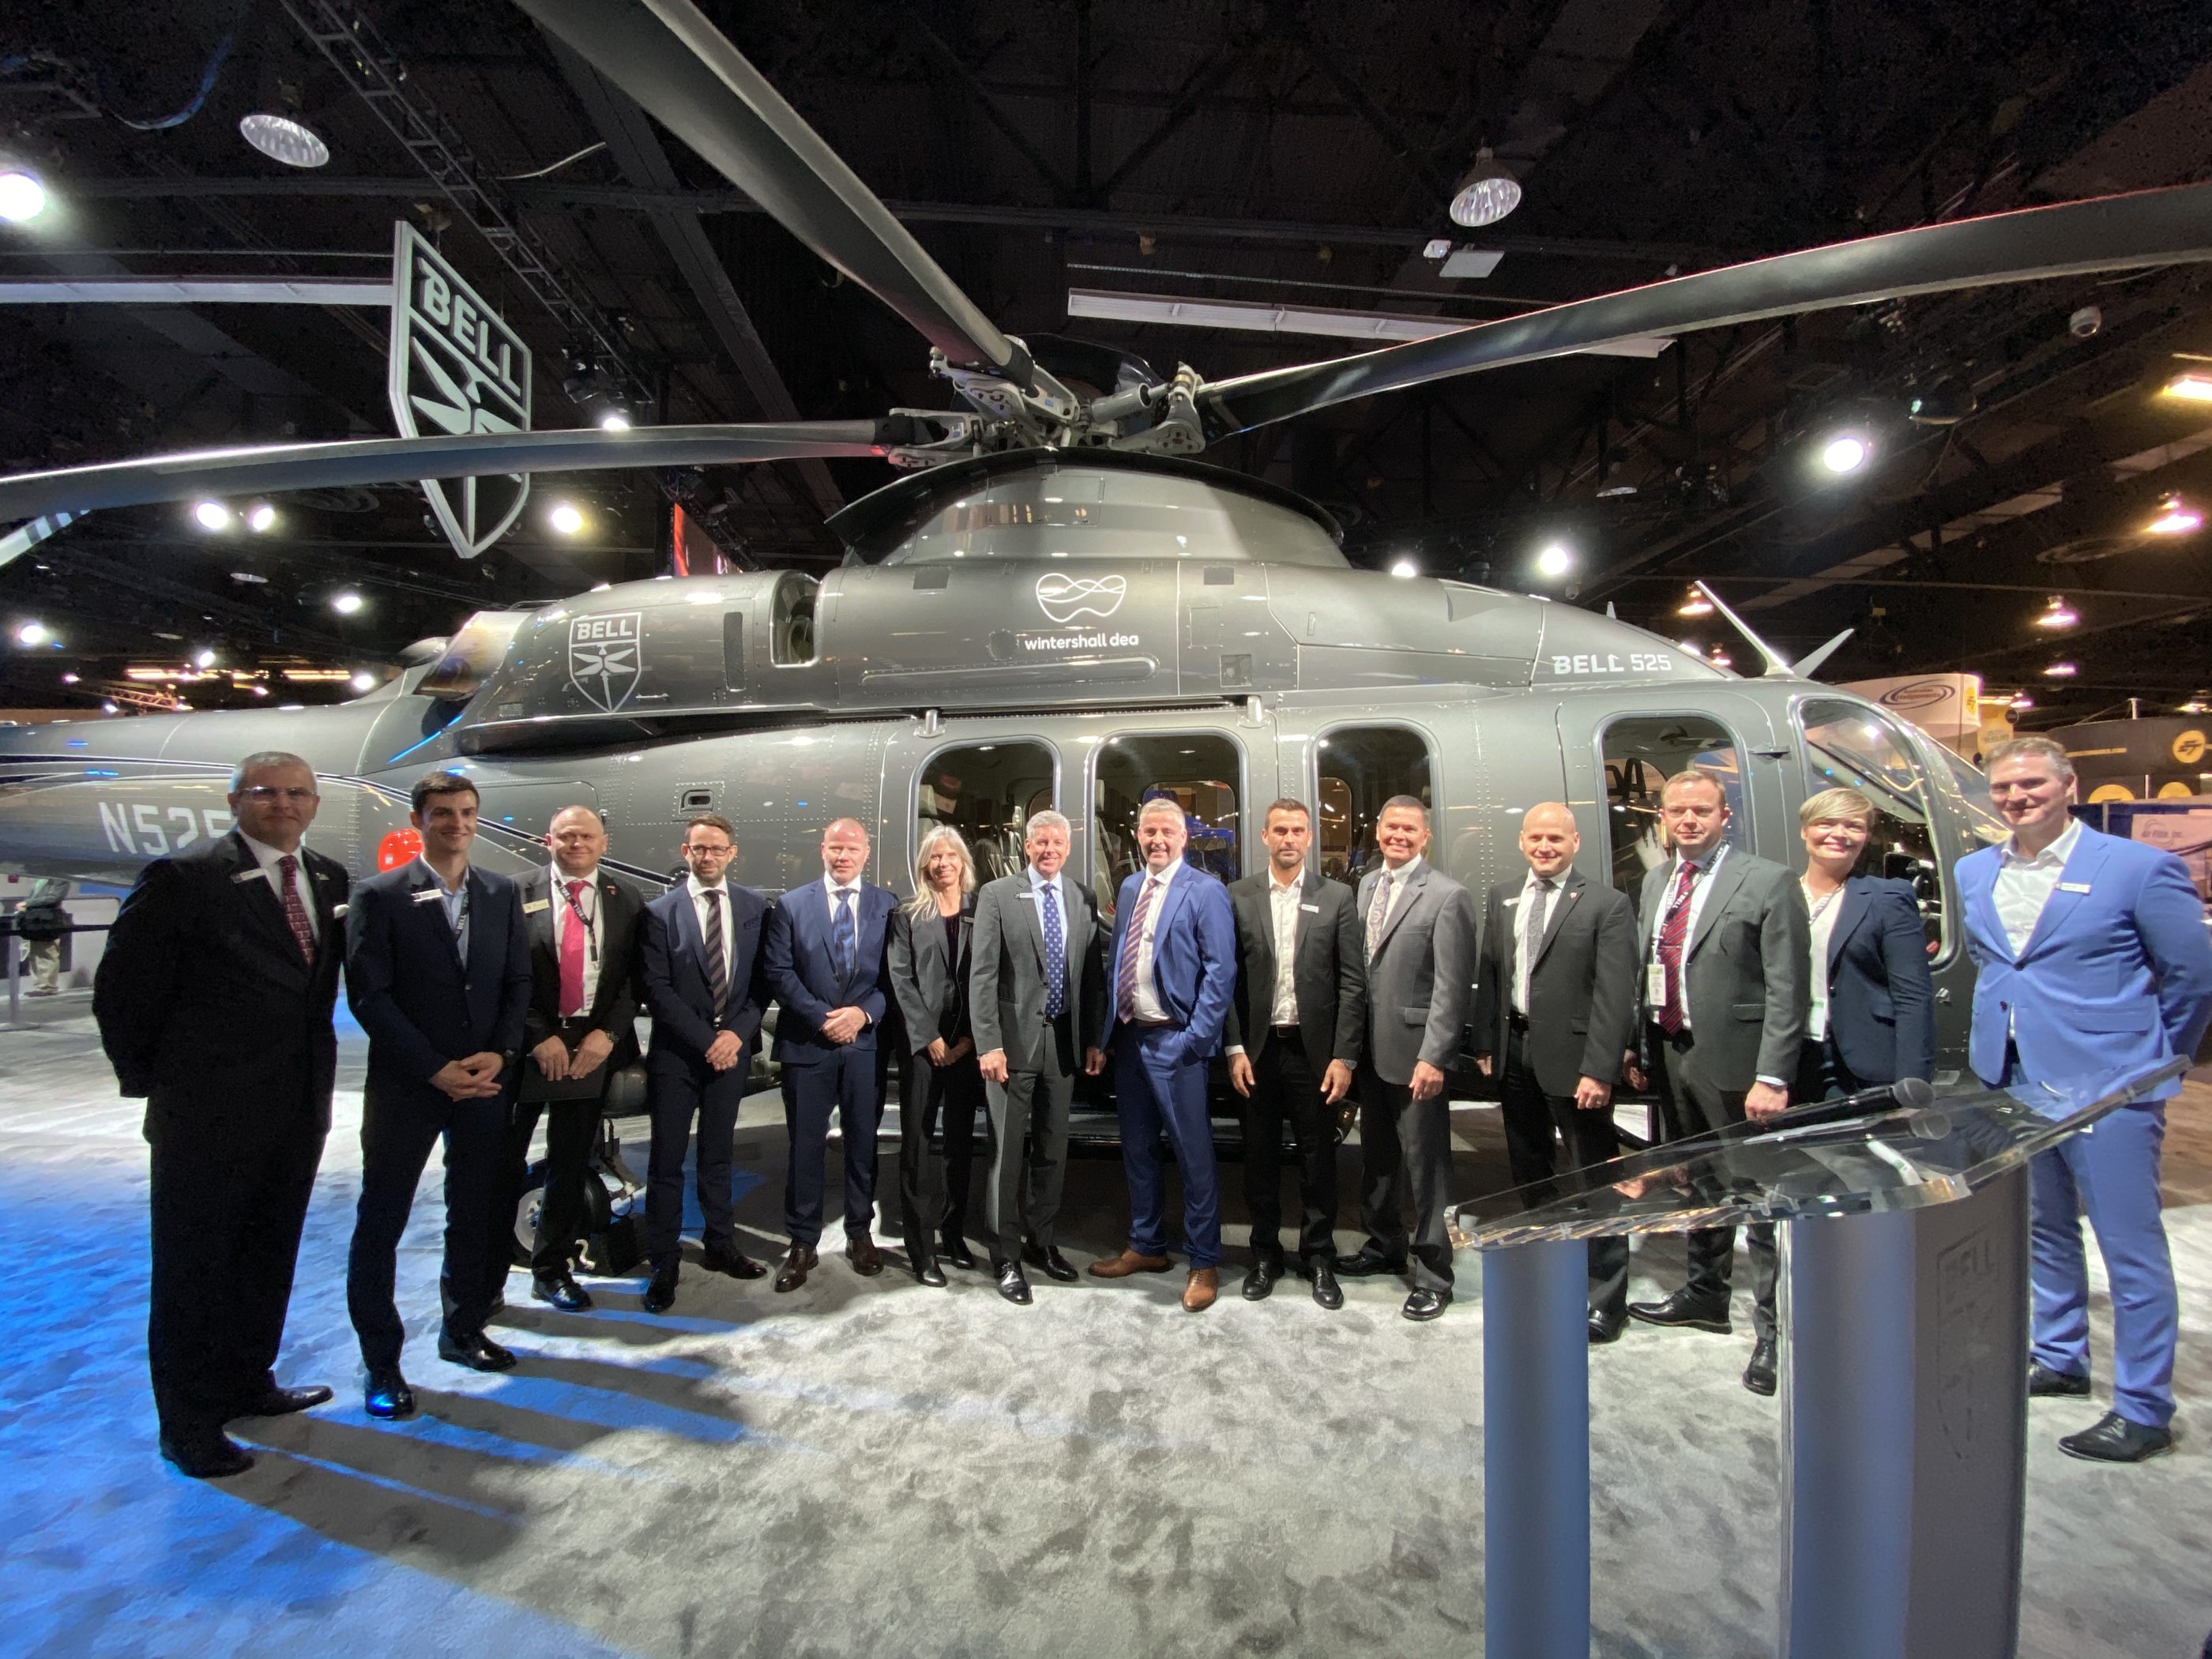 Bell and Wintershall Dea met at HAI 2020 in front of the Bell 525 aircraft to commemorate their relationship. Bell Photo